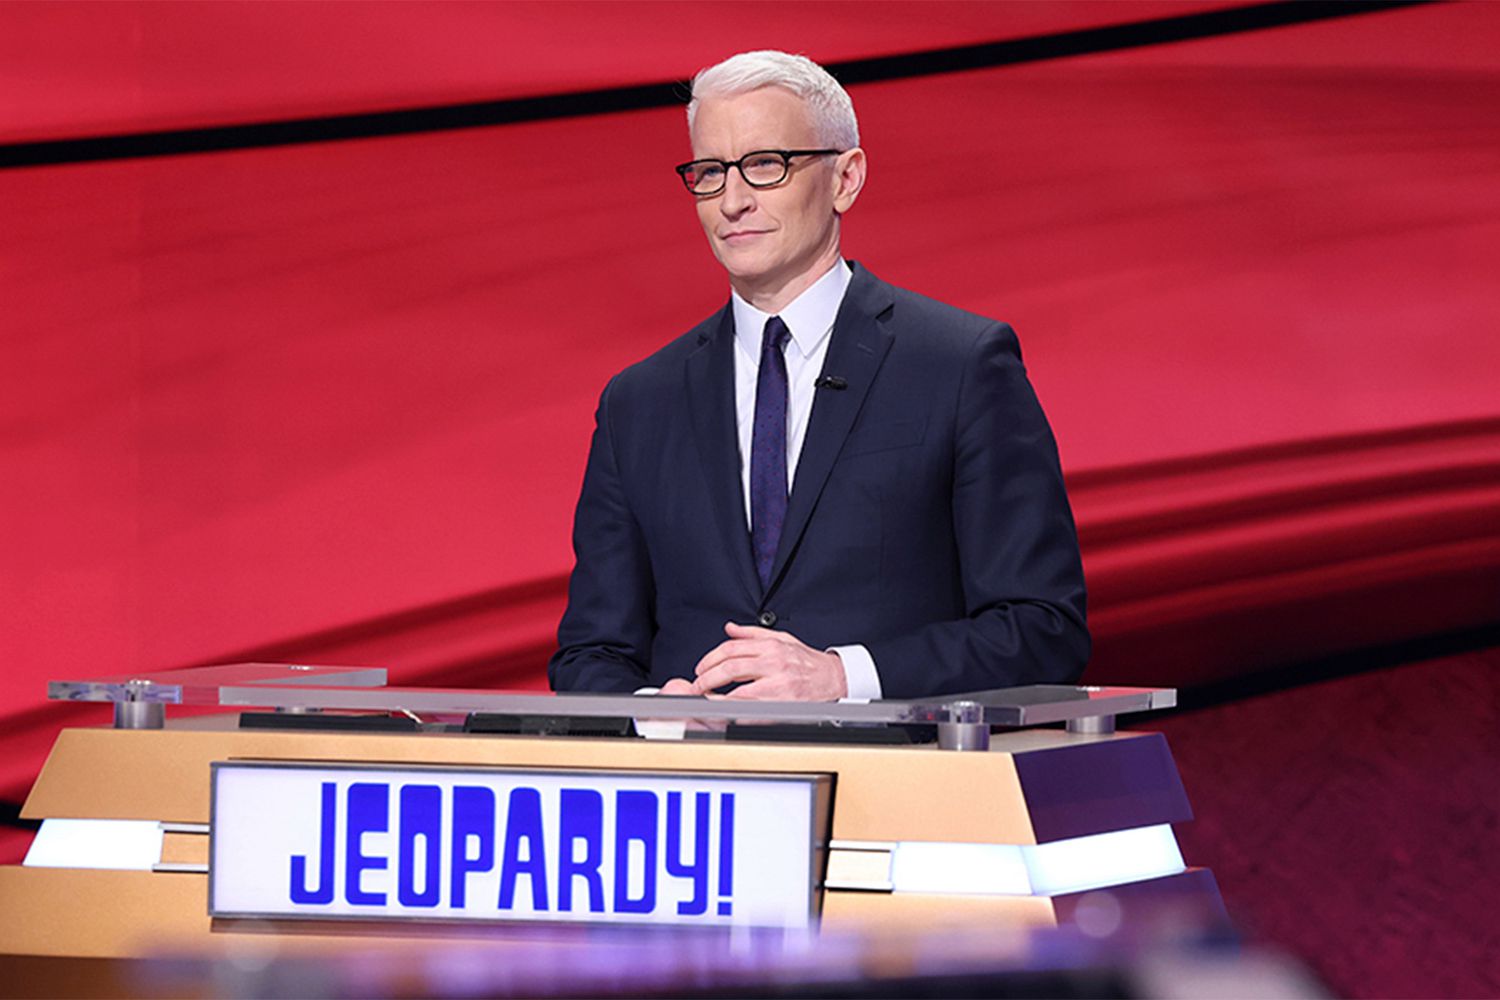 Anderson Cooper scores lowest ratings among 'Jeopardy' guest hosts so far - Entertainment Weekly News